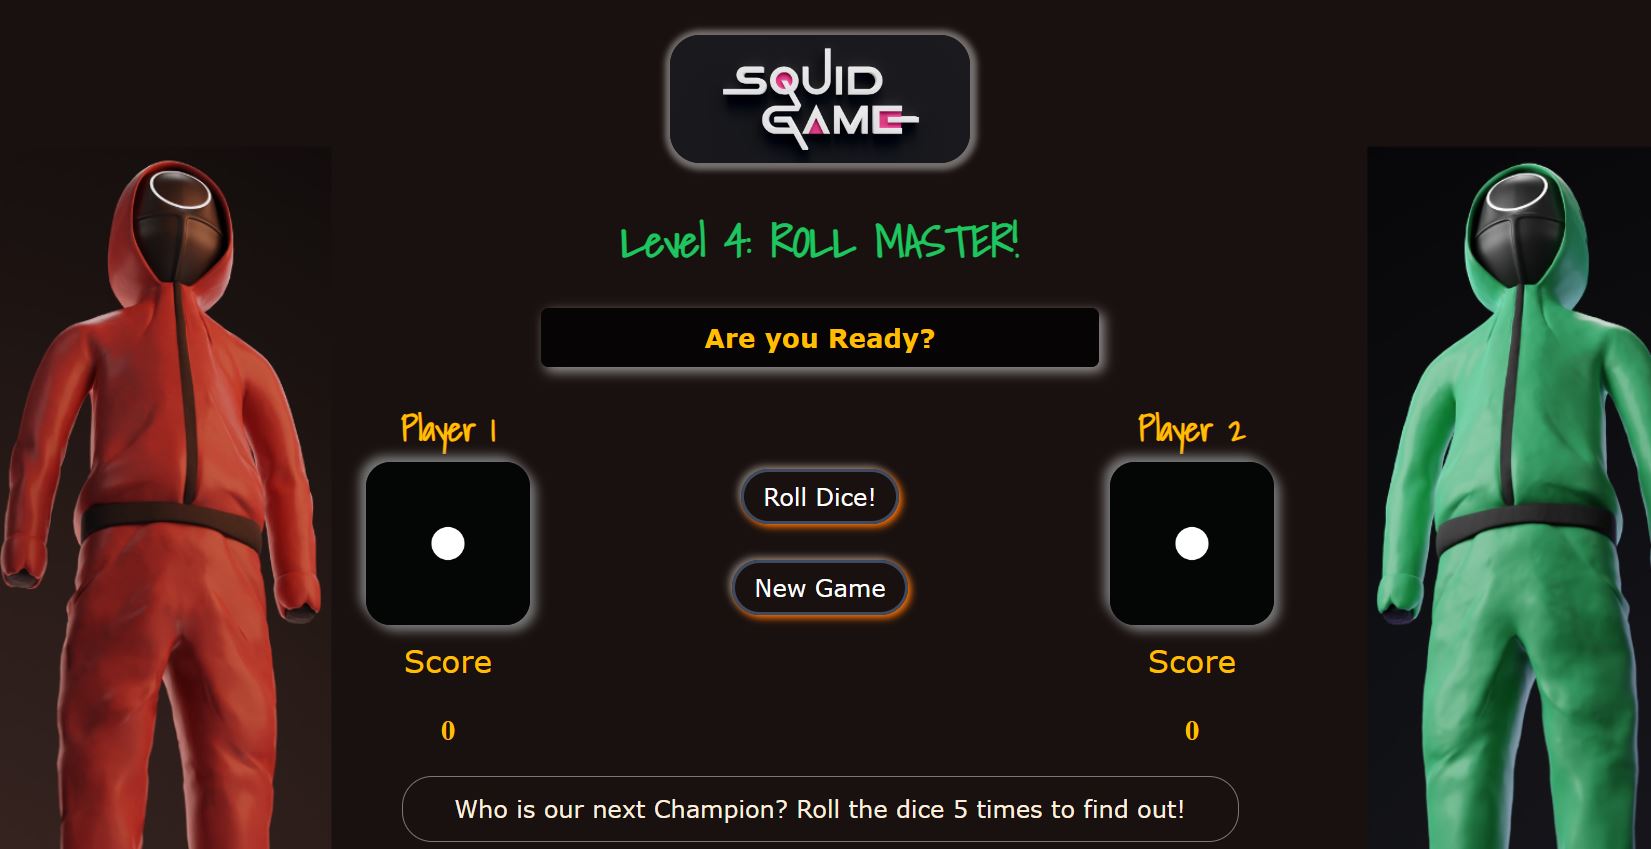 Web application of a rolling dice game design inspired by the Squid Game series.